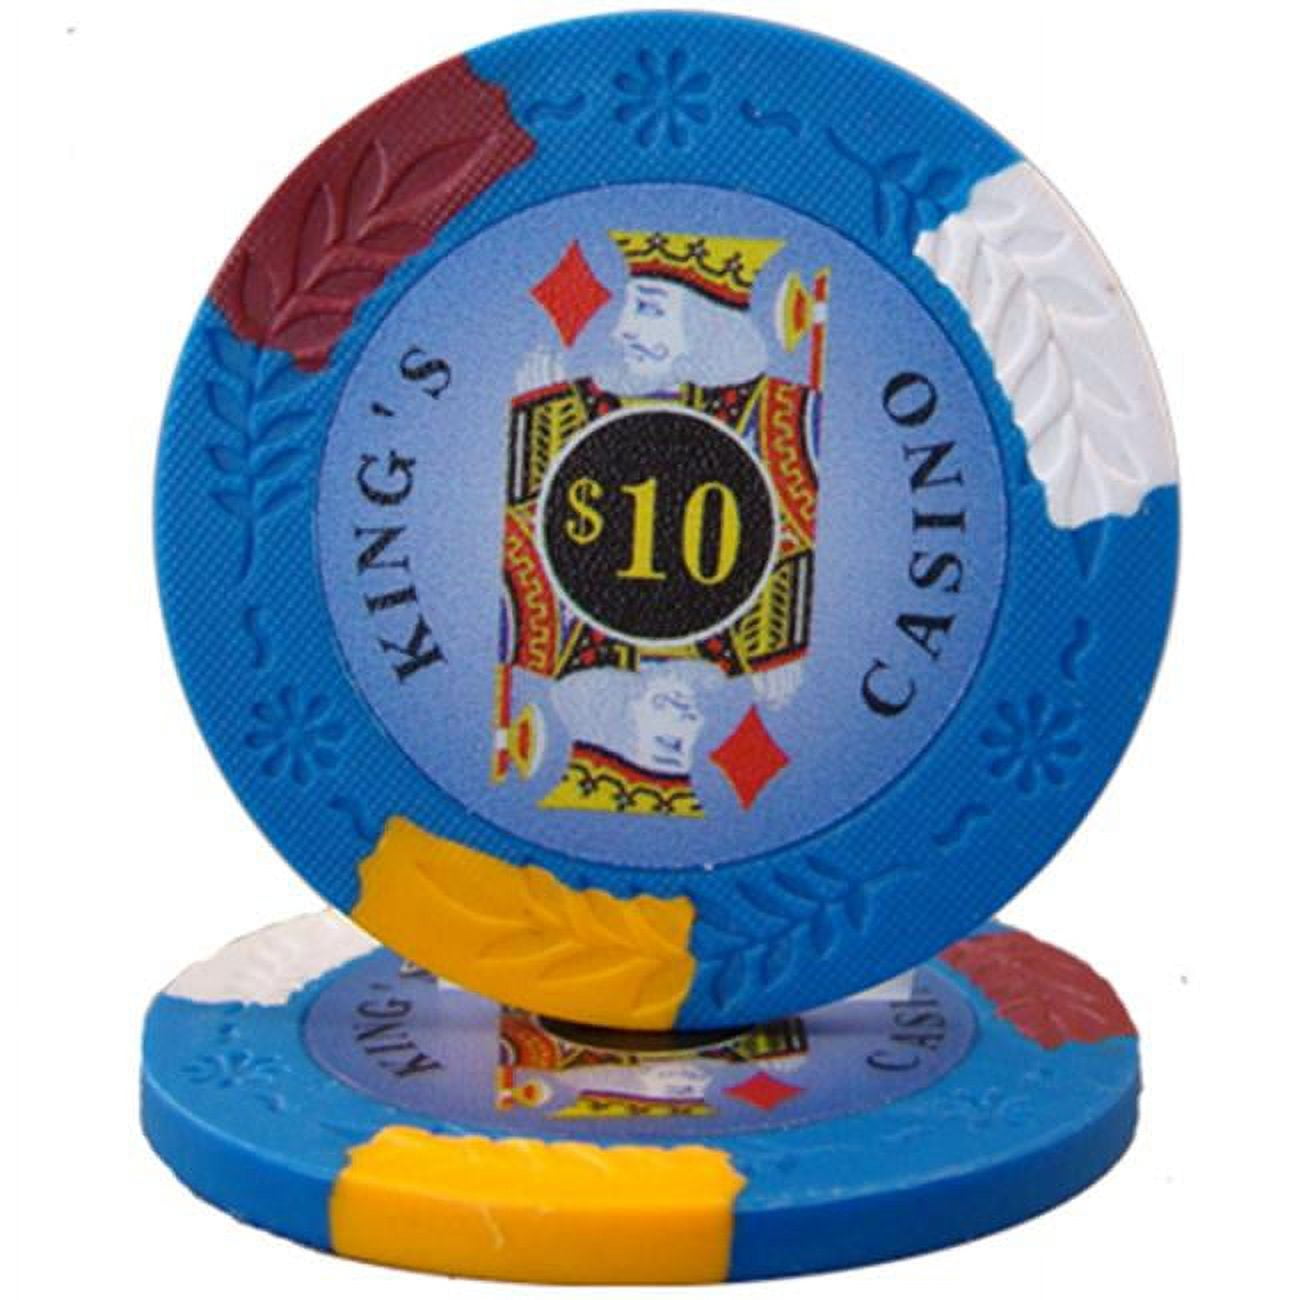 Cpkc-10-25 14 G Kings Casino Pro Clay - Dollar 10, Roll Of 25